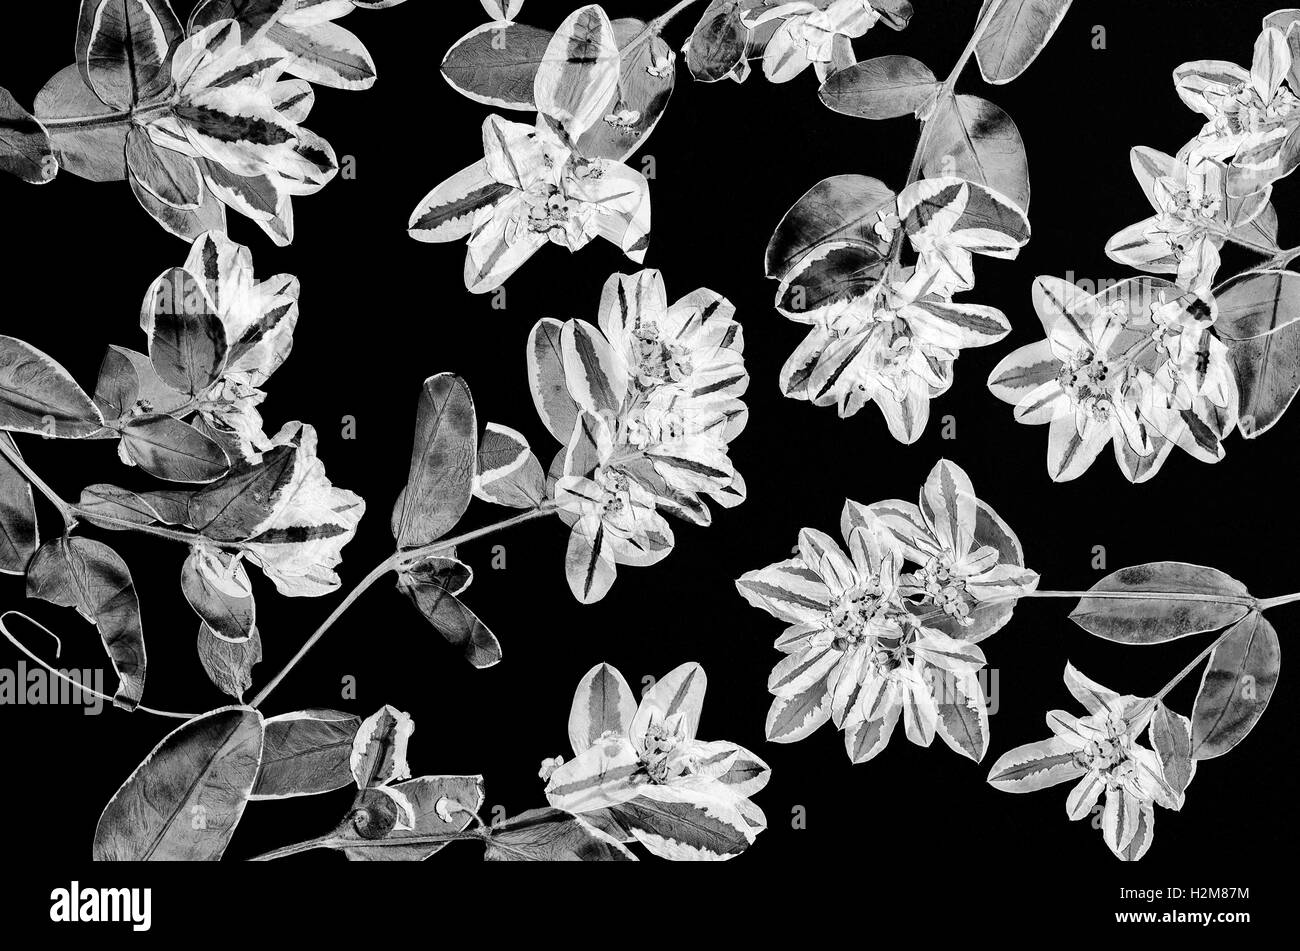 A composition of pressed flowers on black background shot black and white Stock Photo